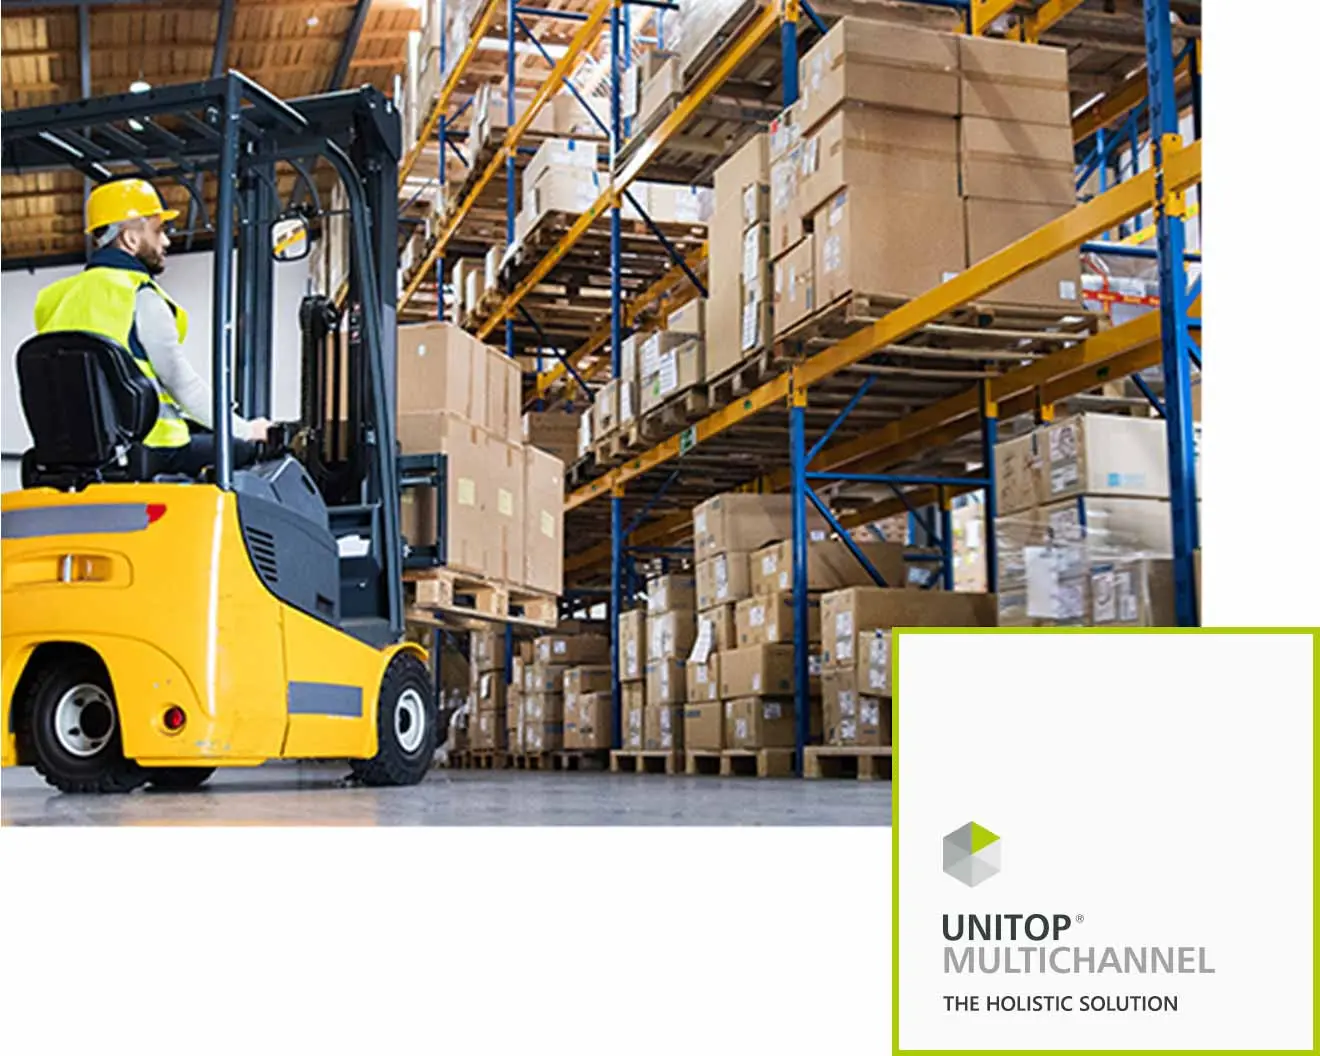 Worker operating a forklift in a warehouse and unitop multichannel logo at the bottom right